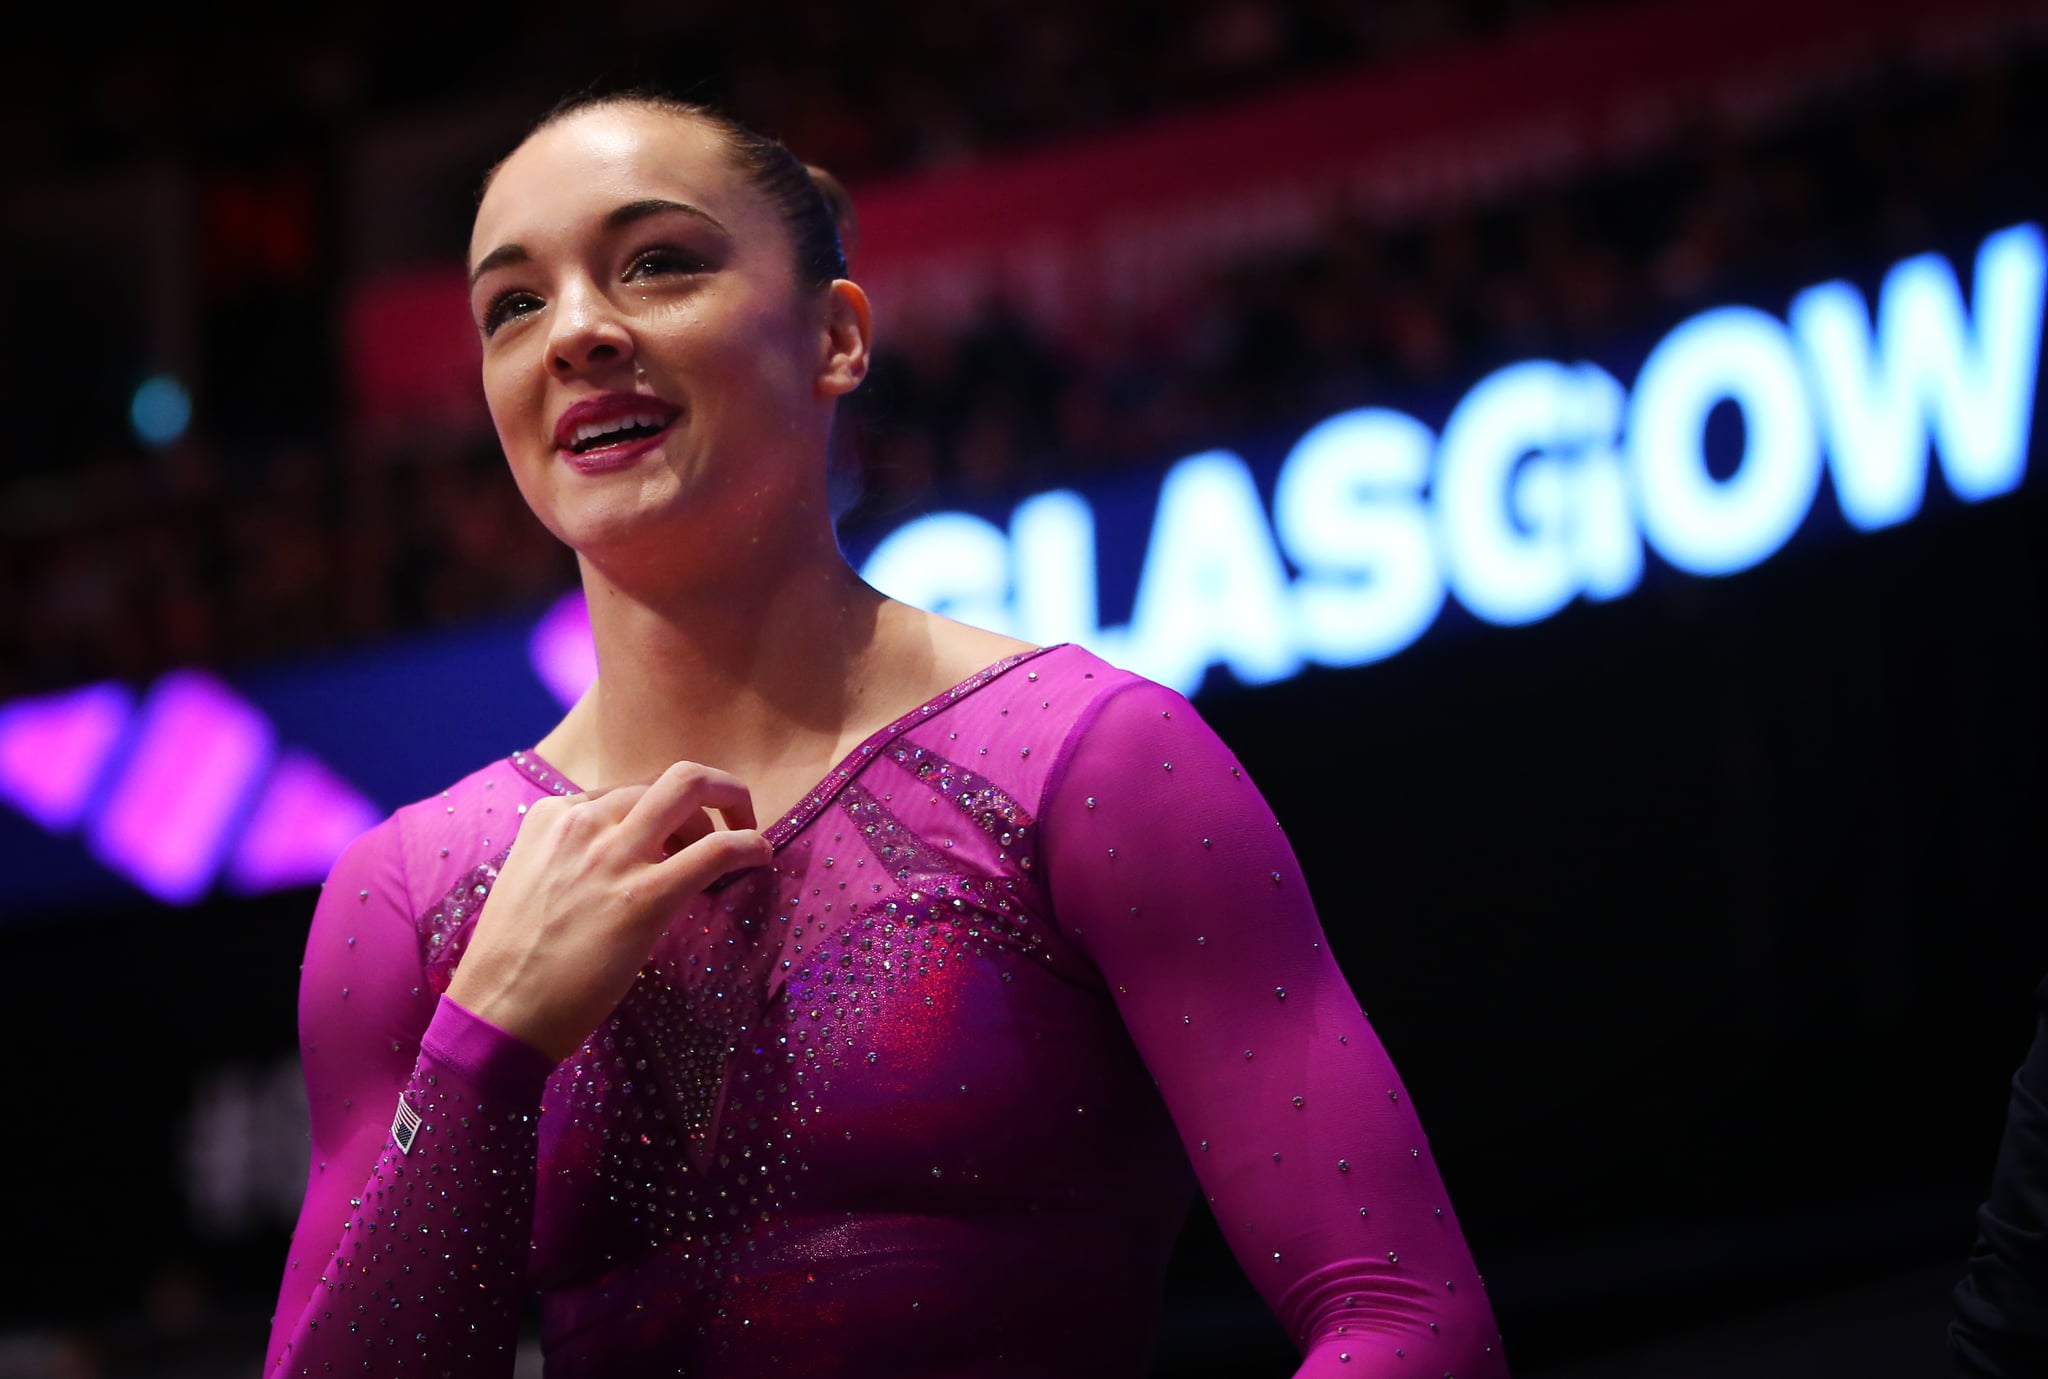 GLASGOW, SCOTLAND - NOVEMBER 01:  Margaret Nichols of United Staes reacts during day ten of The World Artistic Gymnastics Championships at The SSE Hydro on November 01, 2015 in Glasgow, Scotland. (Photo by Ian MacNicol/Getty images)